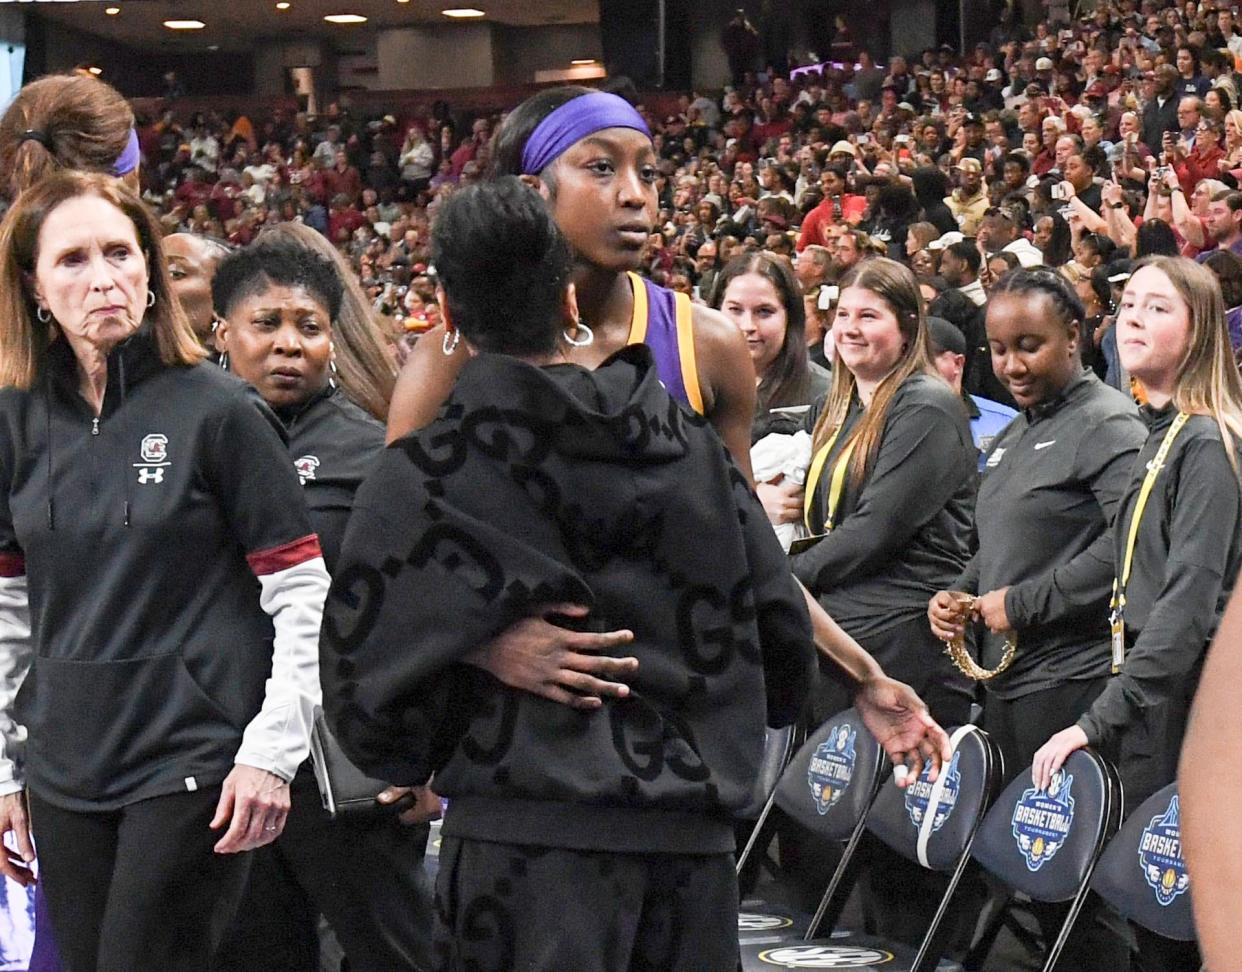 LSU guard Flau'jae Johnson hugs South Carolina coach Dqwn Staley after South Carolina's win in the SEC tournament title game in Greenville, S.C., on Sunday. Johnson was shoved to the ground by South Carolina player Kamilla Cardoso during a fourth-quarter scrum. Cardoso will have to sit out South Carolina's NCAA opener after her ejection for fighting.